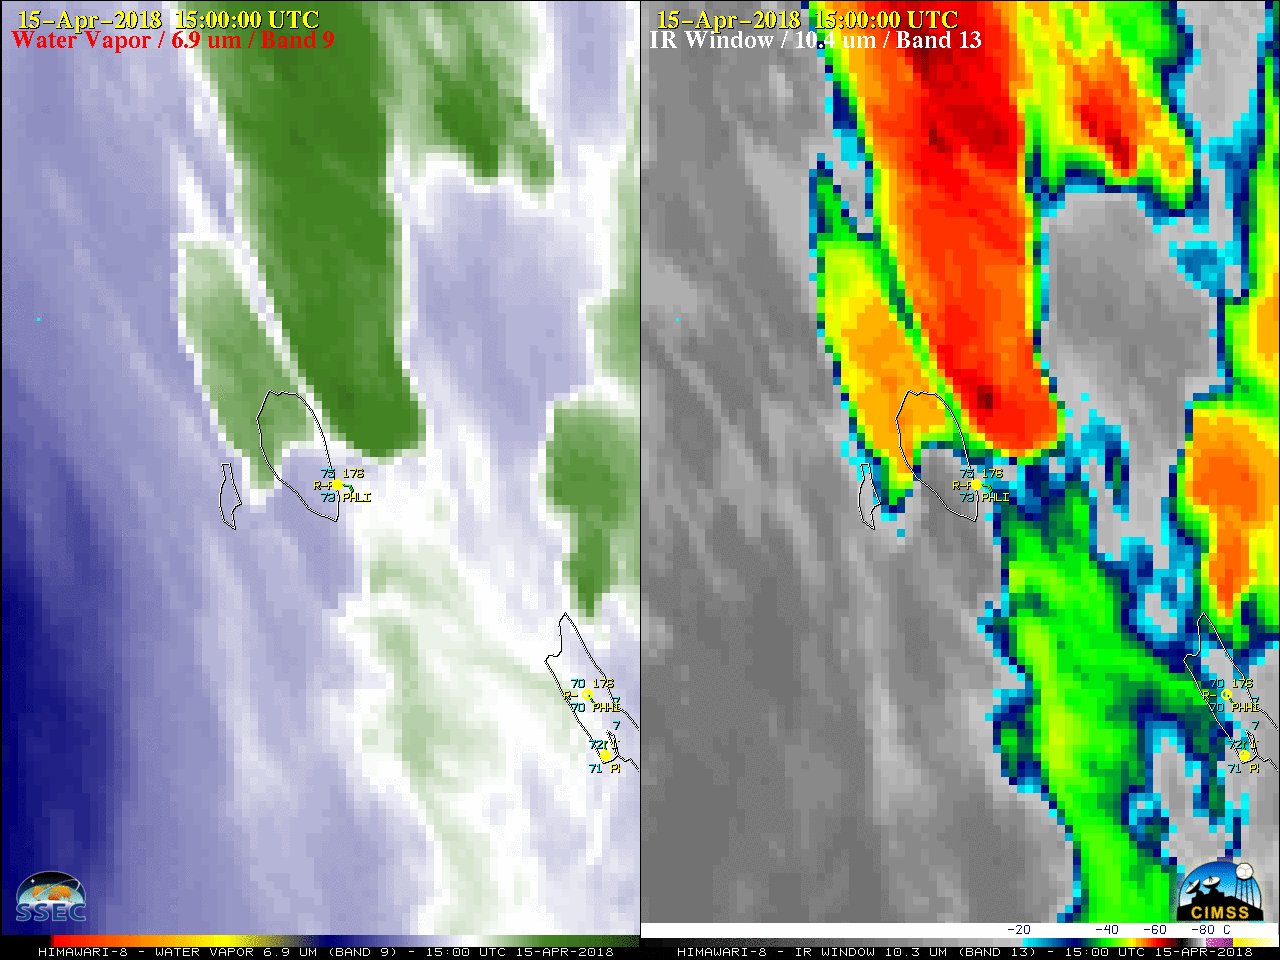 Himawari-8 Water Vapor (6.9 µm, left) and Infrared Window (10.4 µm, right) images, with hourly plots of surface reports [click to play MP4 animation]